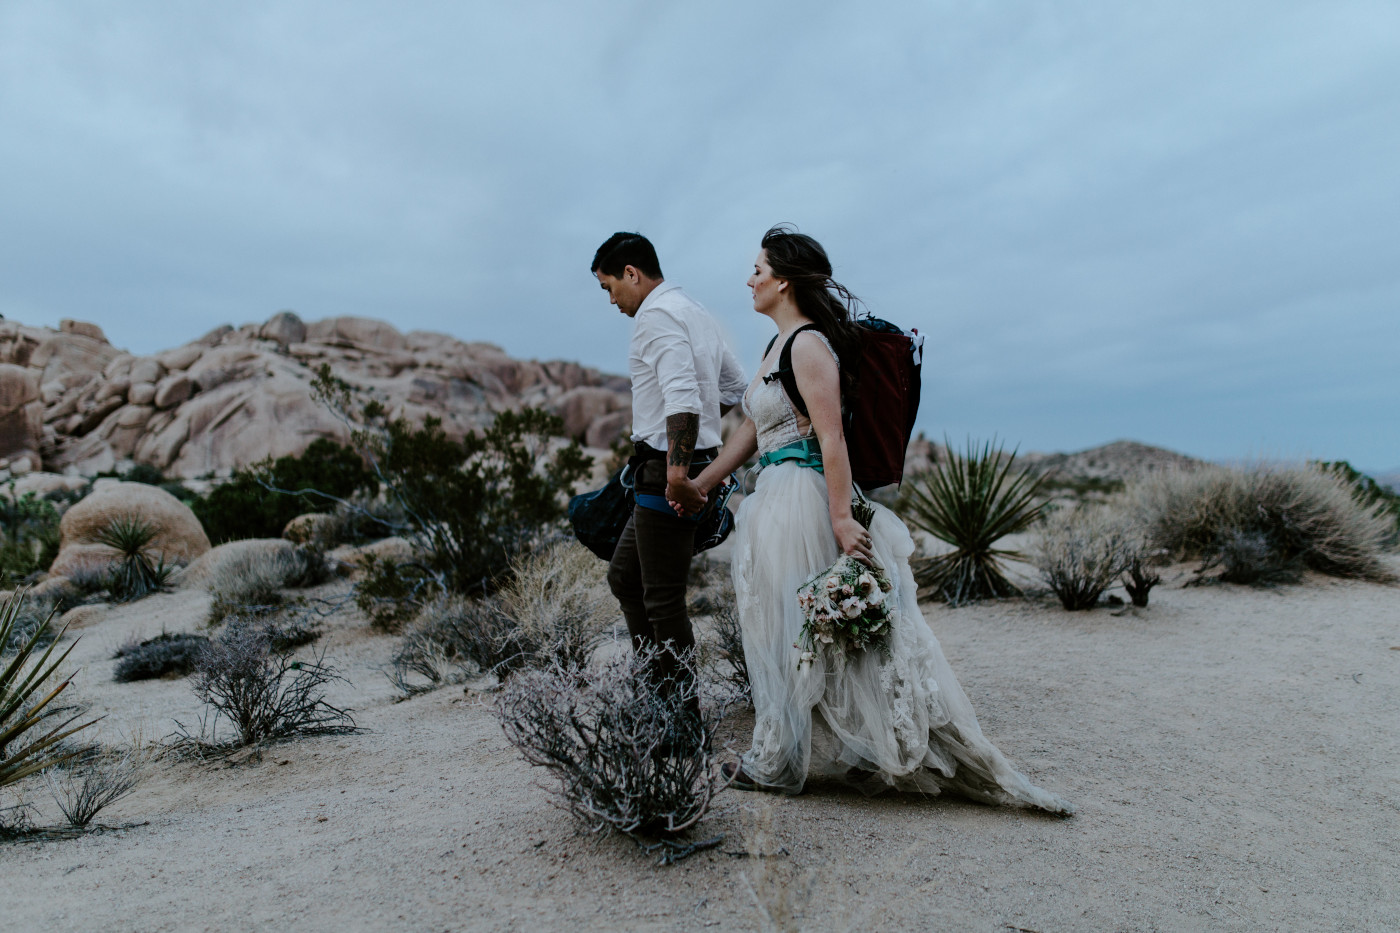 Shelby and Zack hold hands as they walk through Joshua Tree National Park.